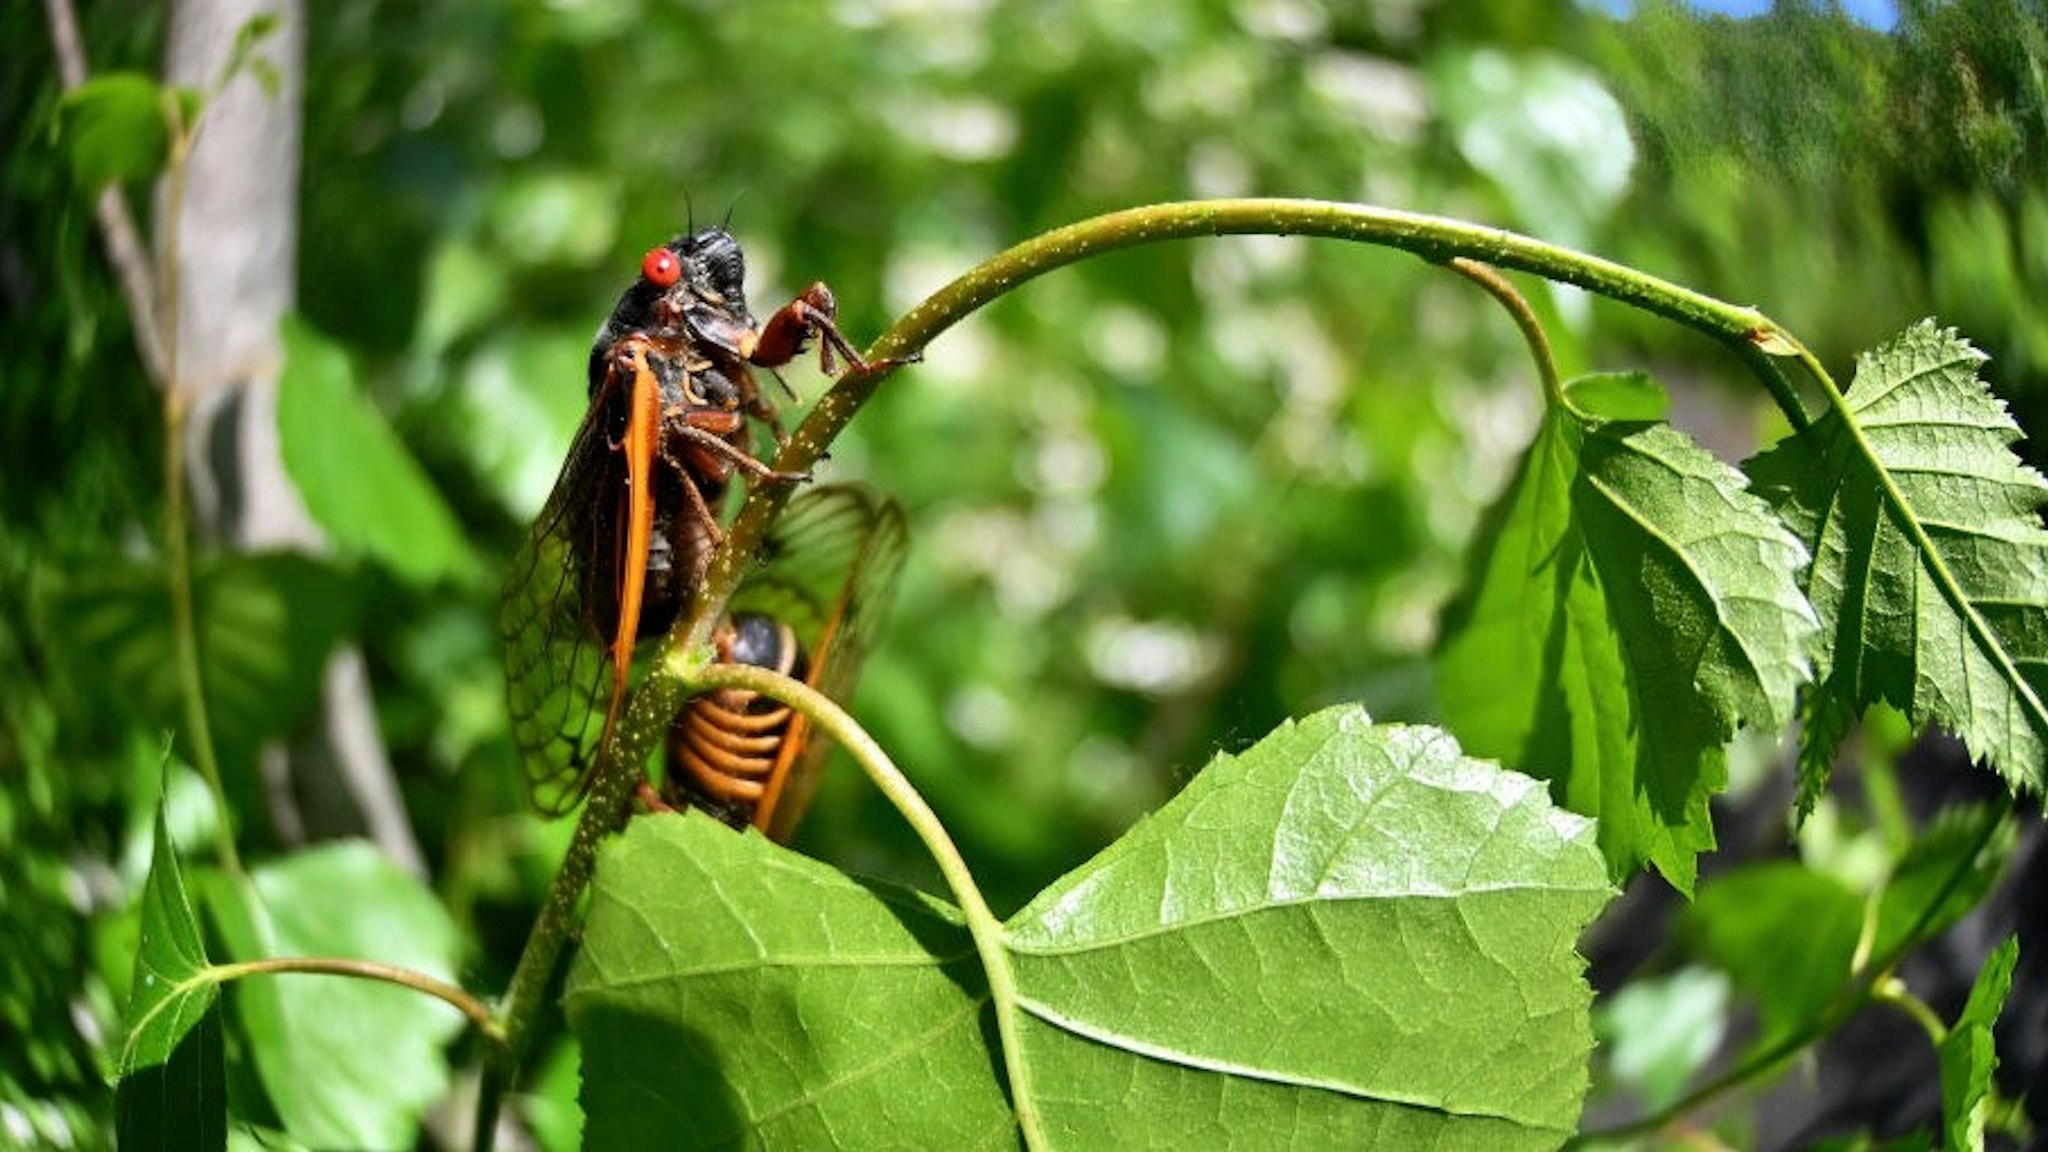 NANTICOKE, UNITED STATES - 2021/06/05: Brood X also known as the Great Eastern Brood Cicada seen in Pennsylvania. Every 17 years, Brood X cicadas come out of the ground to mate and die. (Photo by